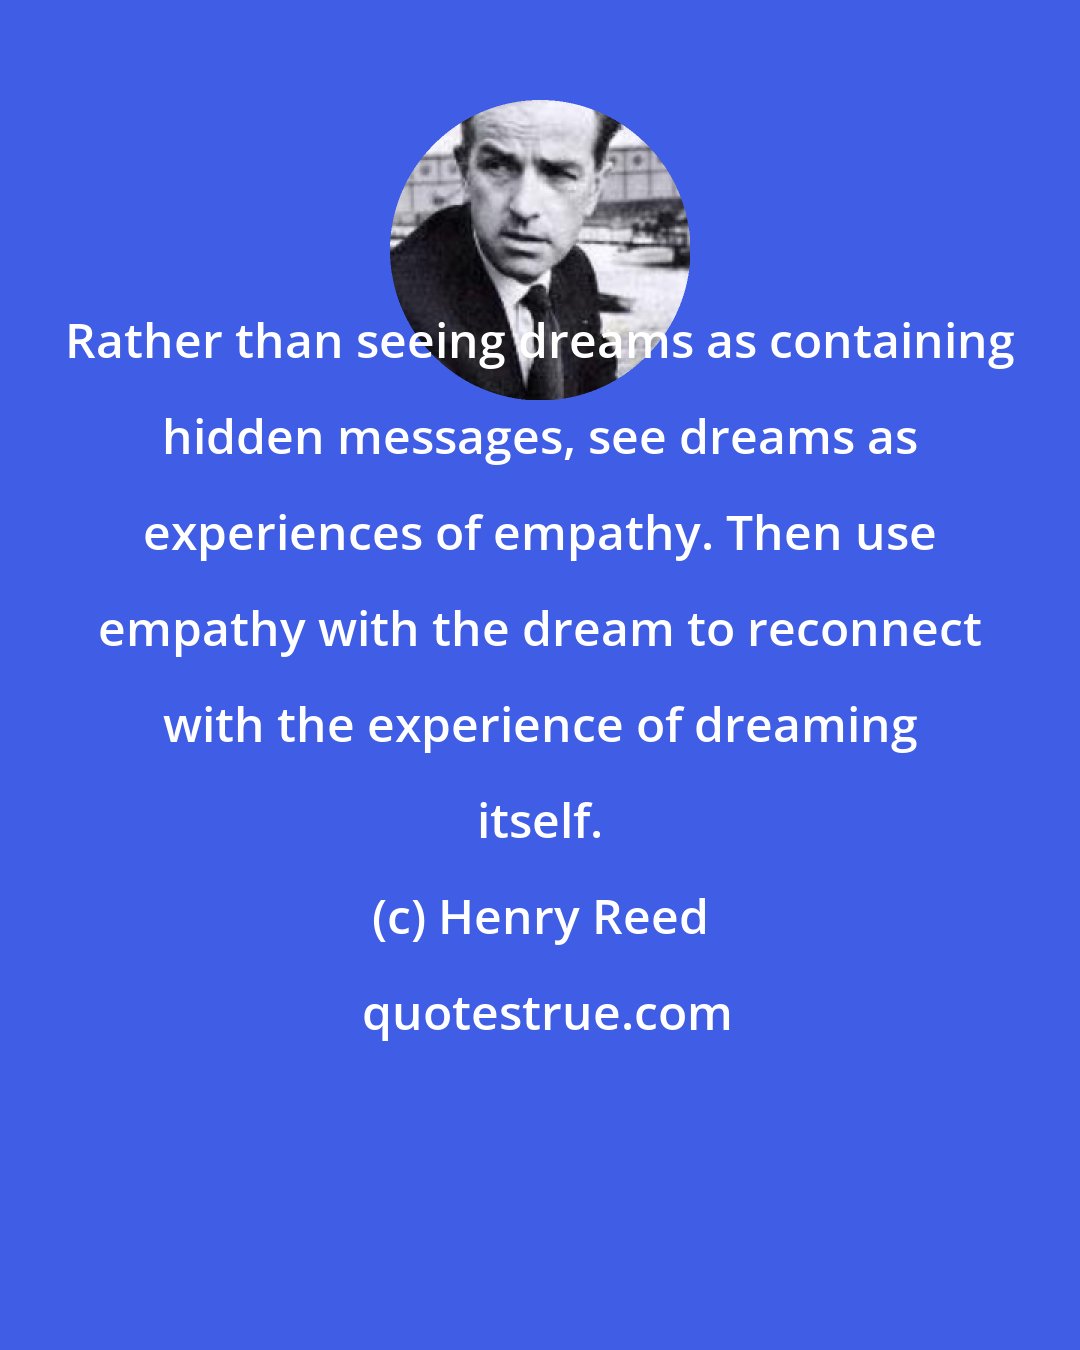 Henry Reed: Rather than seeing dreams as containing hidden messages, see dreams as experiences of empathy. Then use empathy with the dream to reconnect with the experience of dreaming itself.